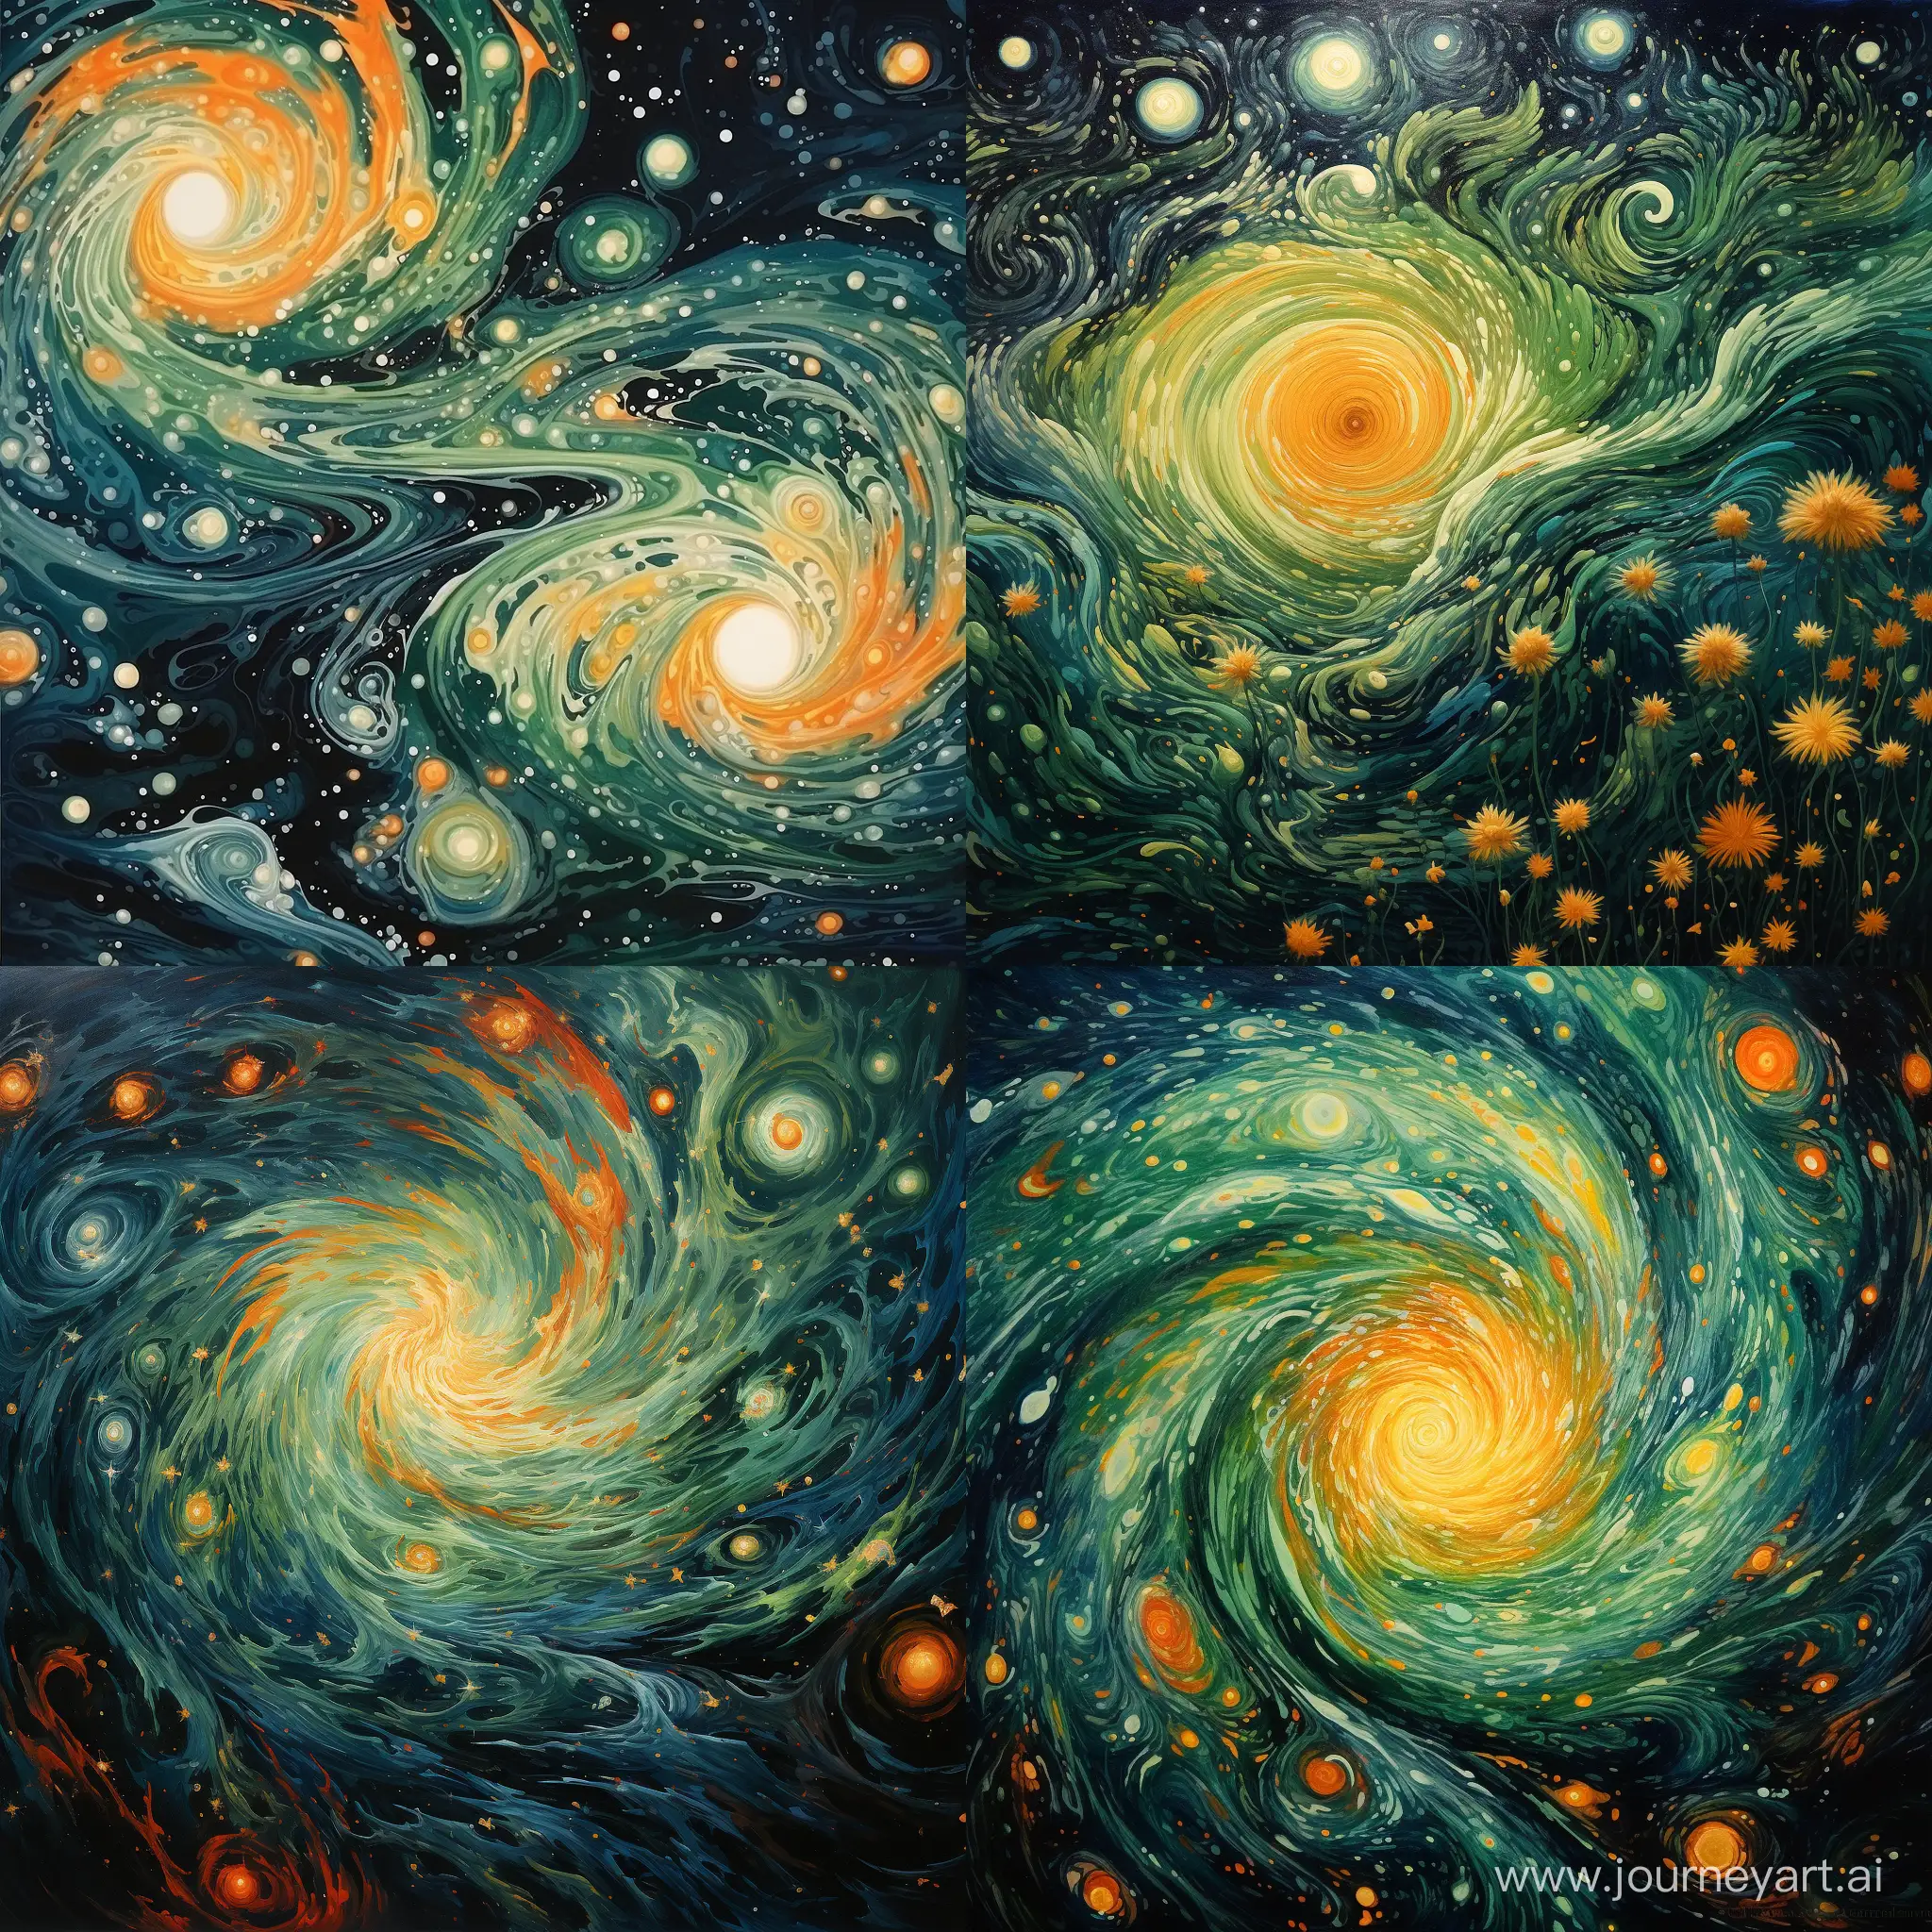 Blumensee within 'Astral Whirls', a style capturing the swirling motion of astral bodies, with colors [green] and [orange] blending like galaxies